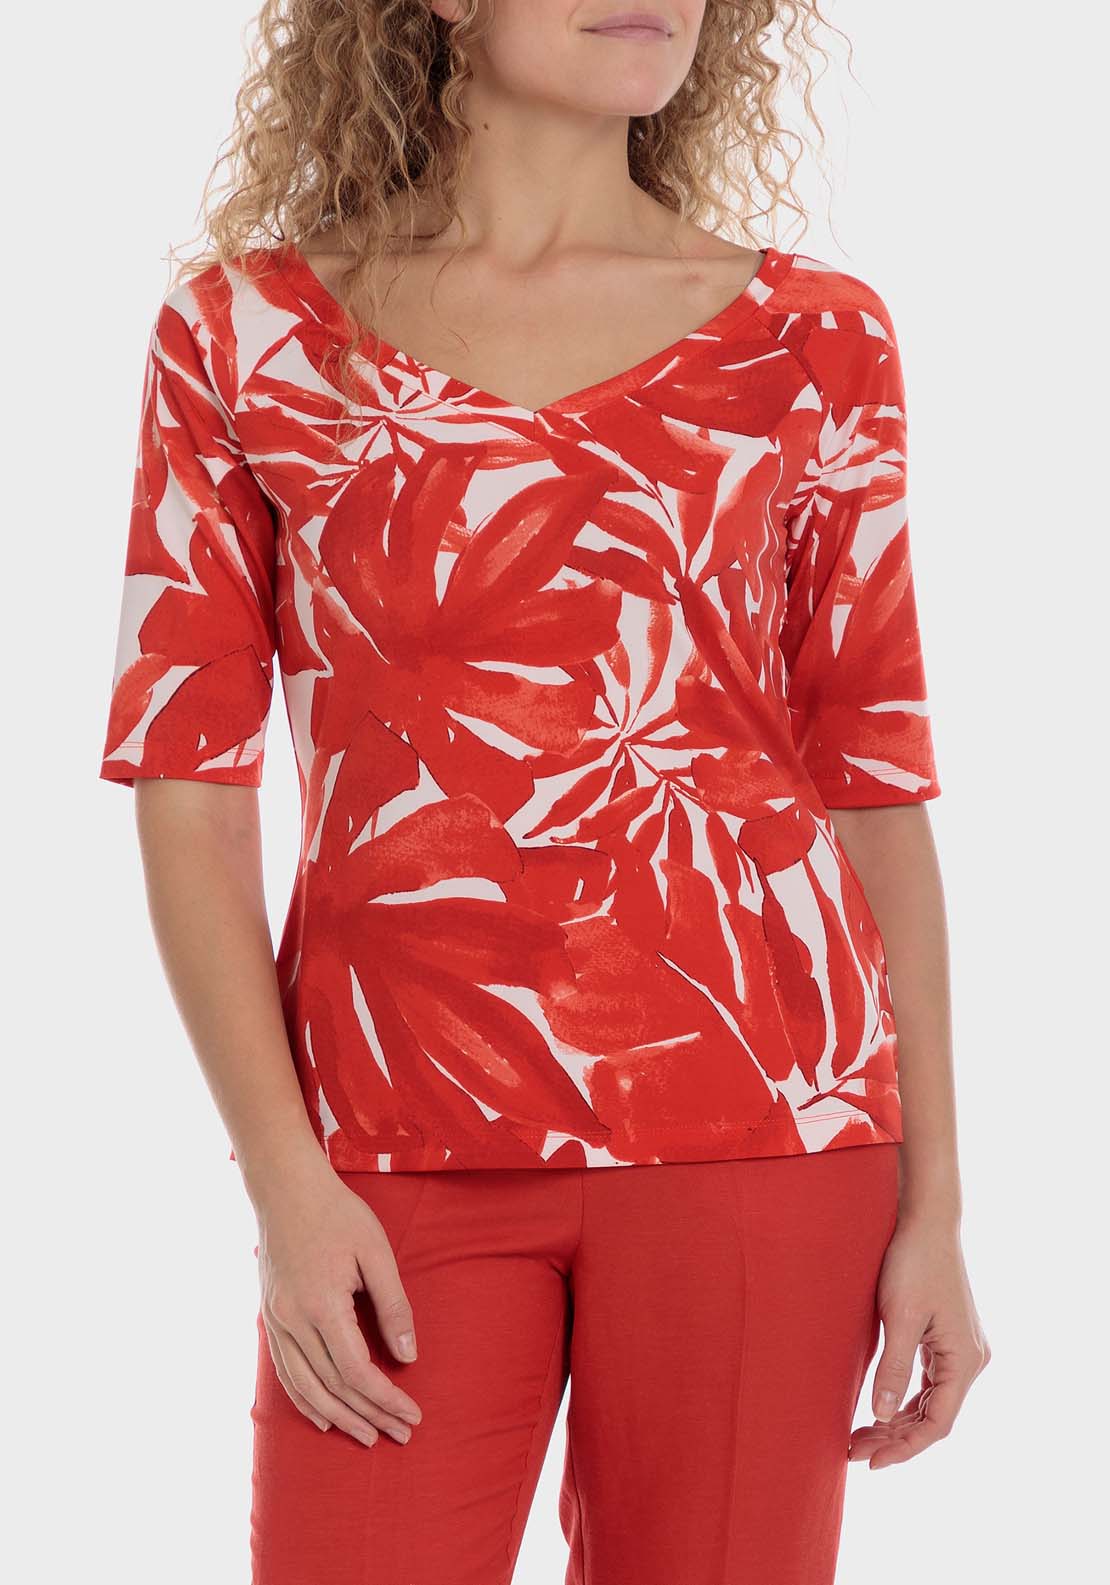 Punt Roma Tropical Print T-Shirt - Red 1 Shaws Department Stores